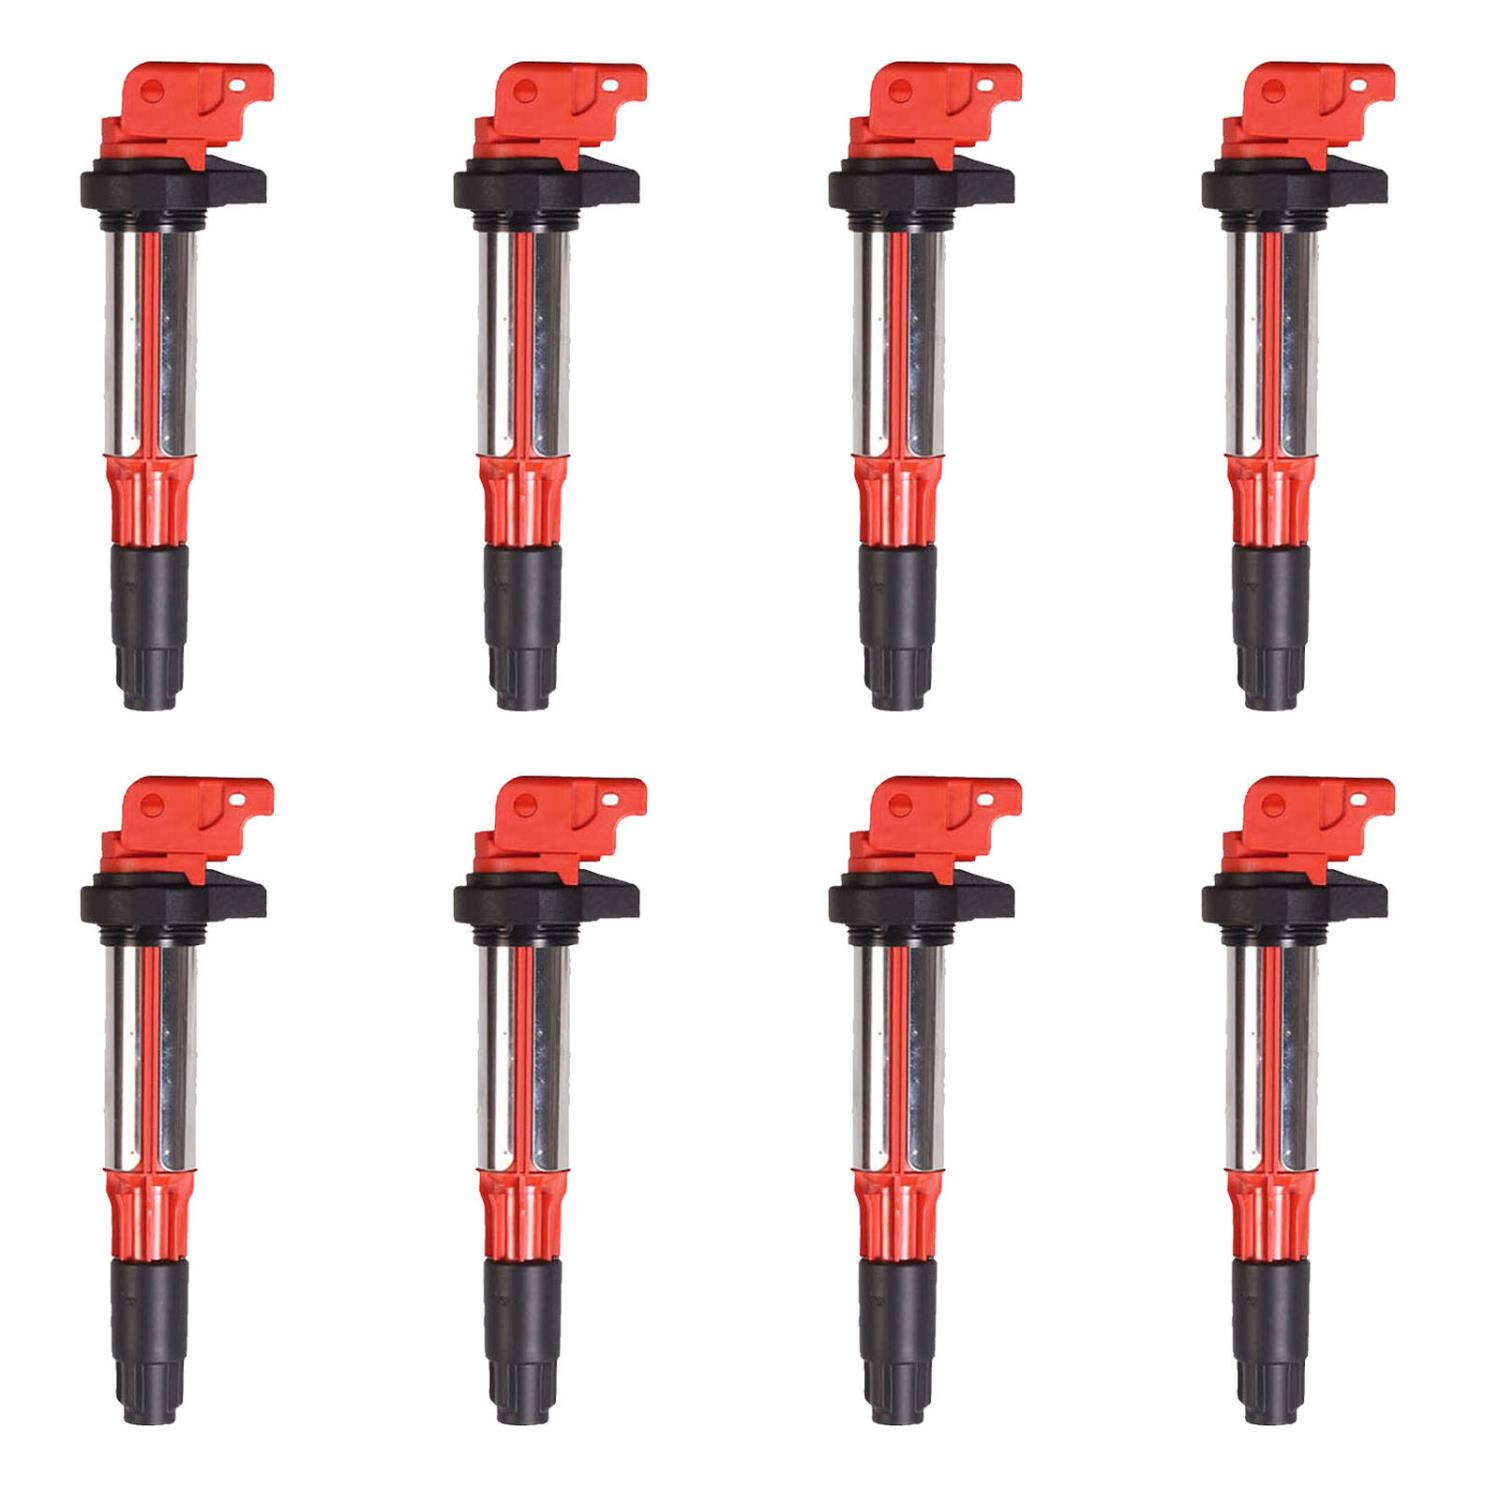 High-Performance Ignition Coils for BMW 750i 550i 650i X5 4.8L [Red]